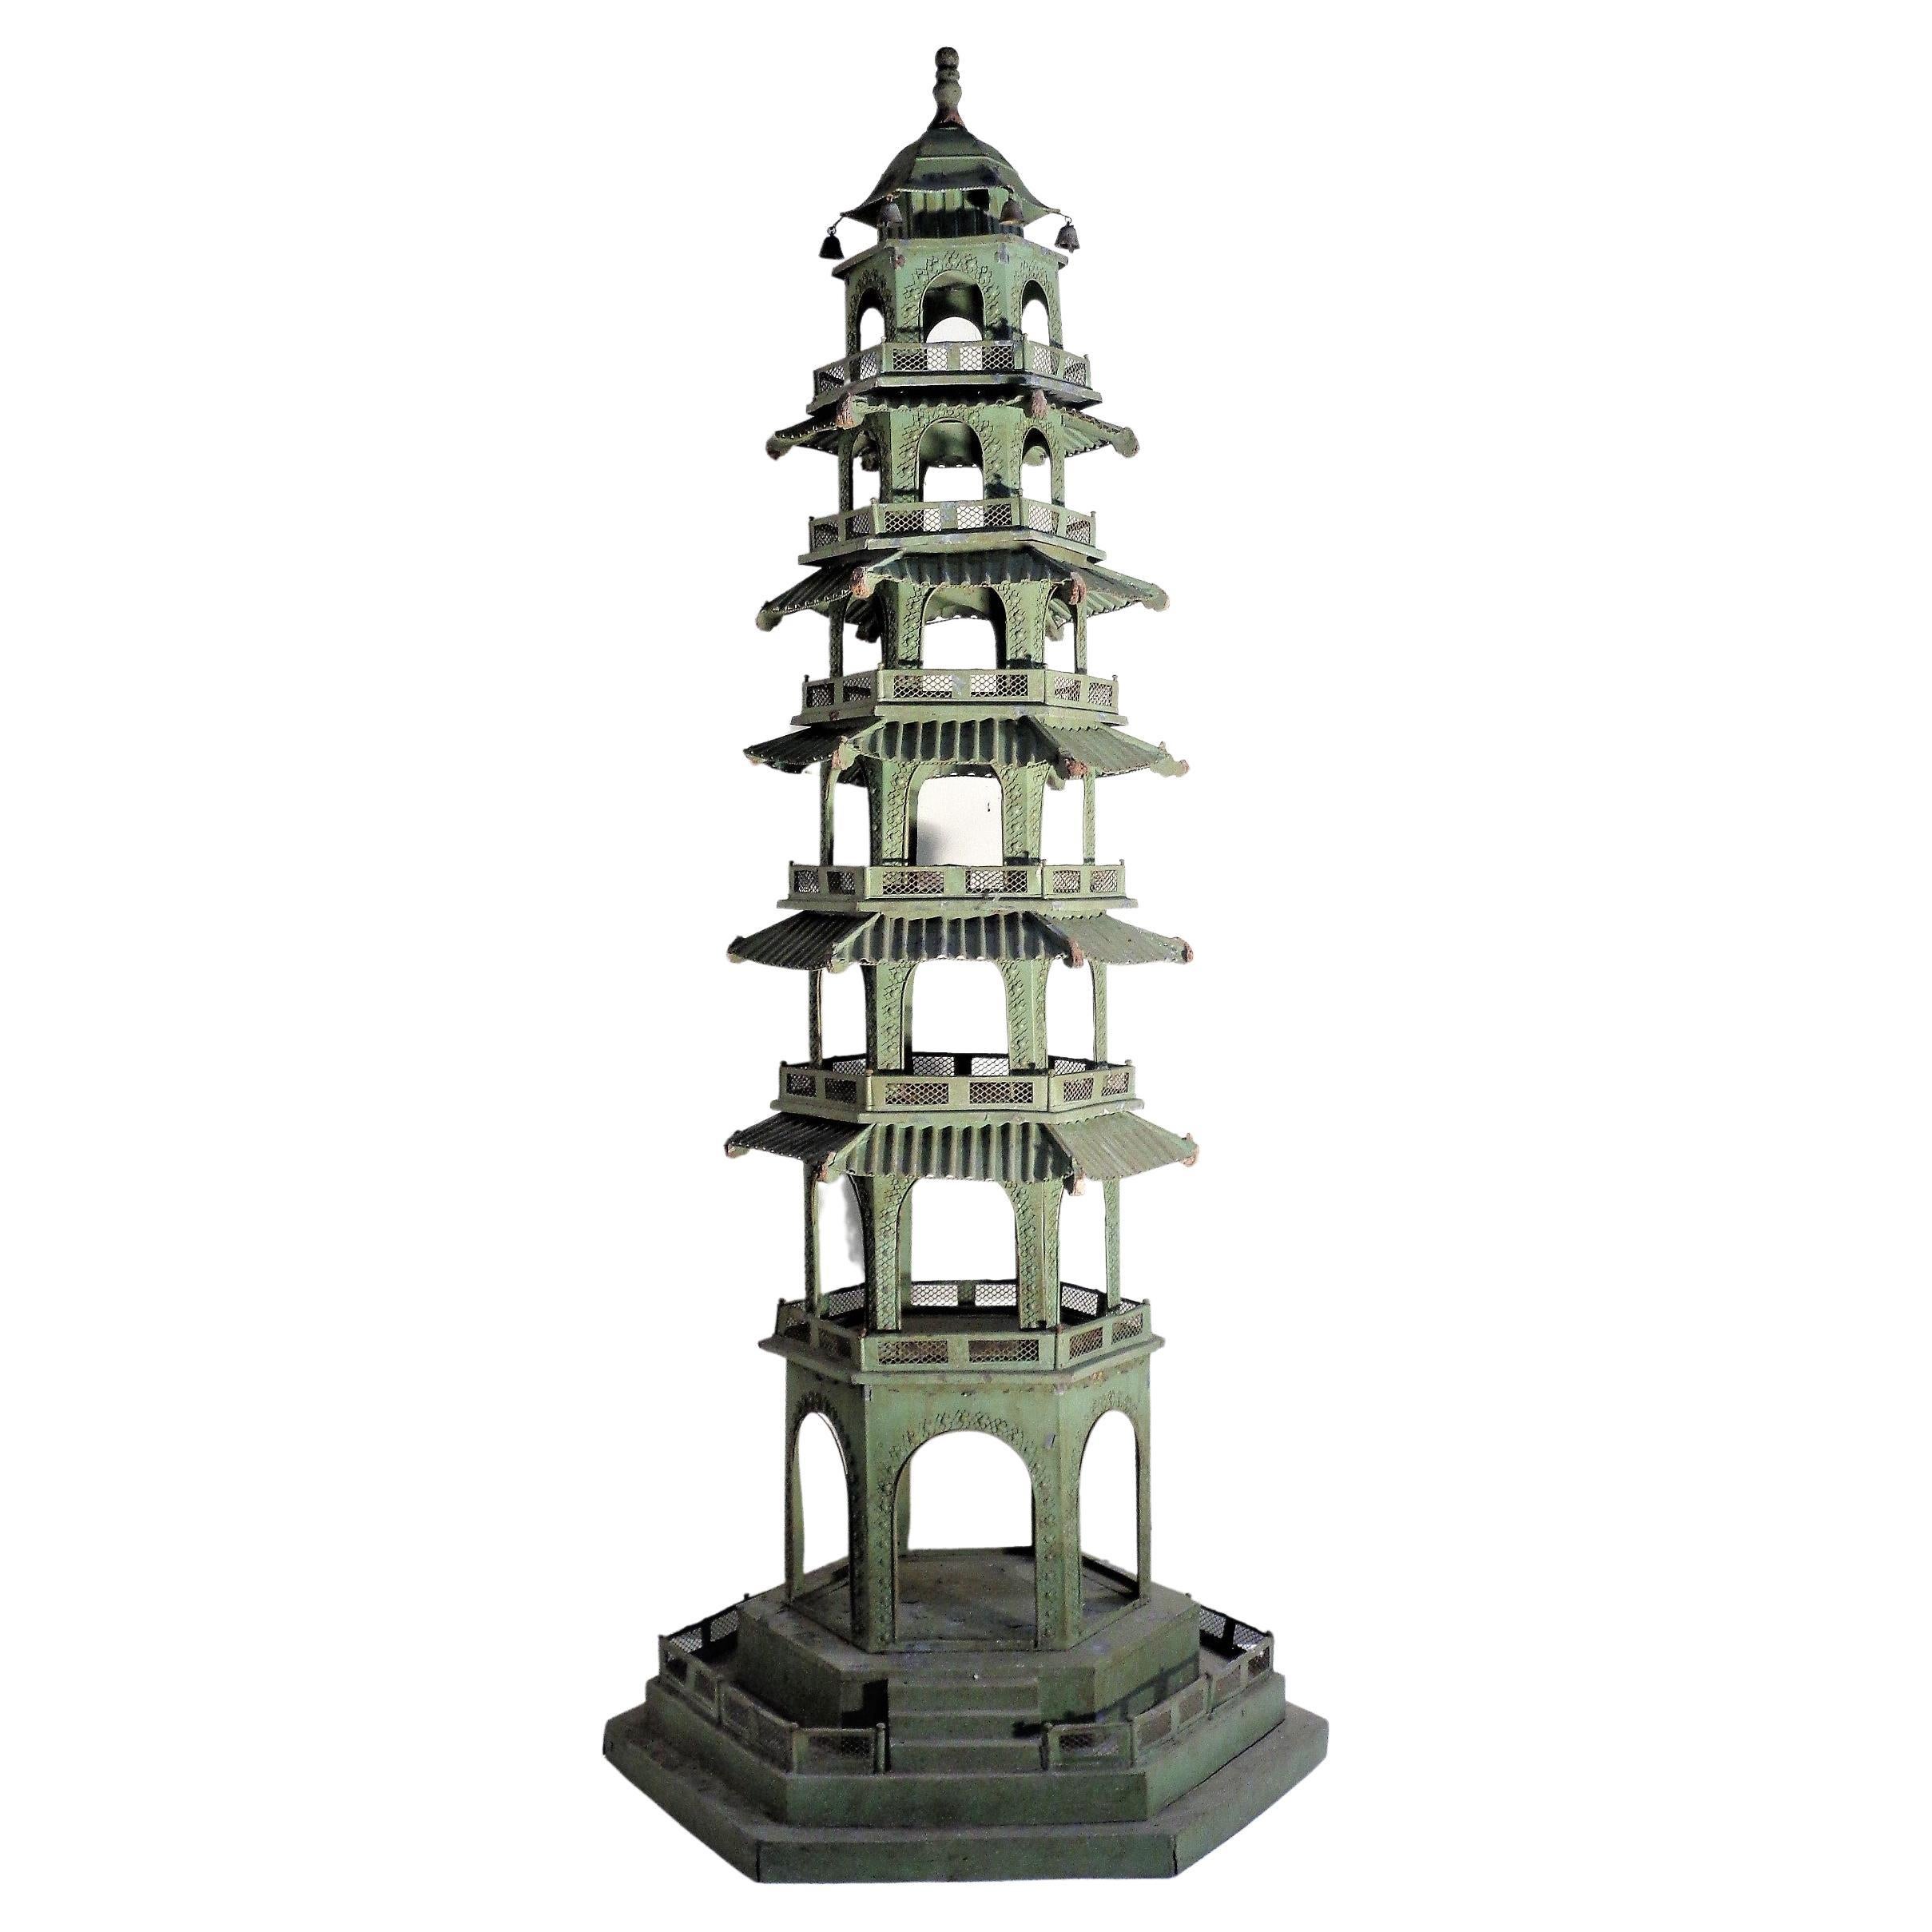 Large Antique Architectural Pagoda